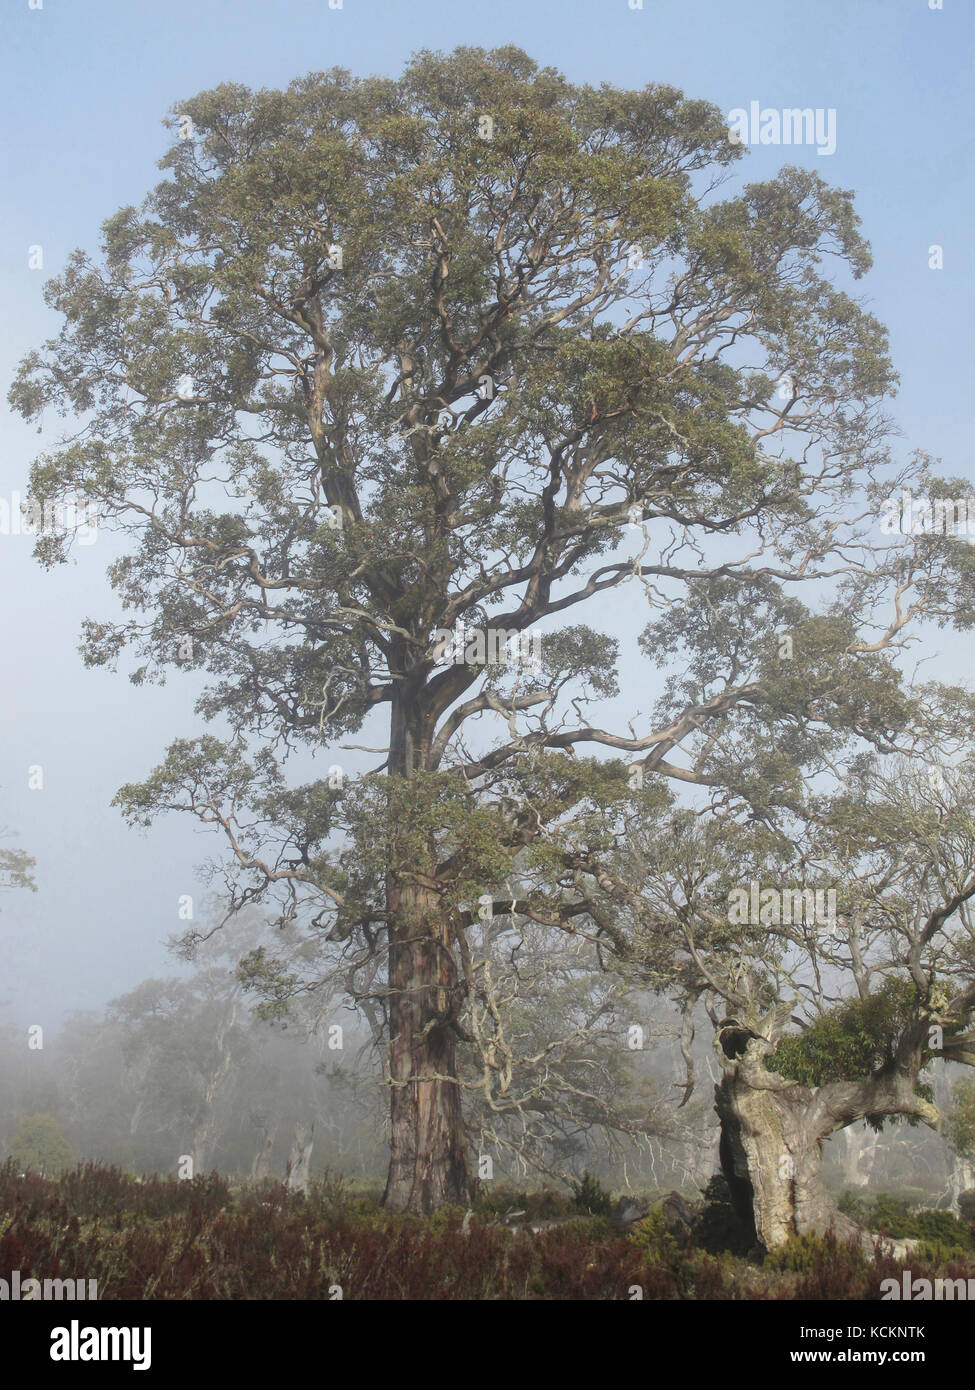 Death of a species: Tasmanian cider gum (Eucalyptus gunnii divaricata), one of now only perhaps one or two thousand trees. Stock Photo